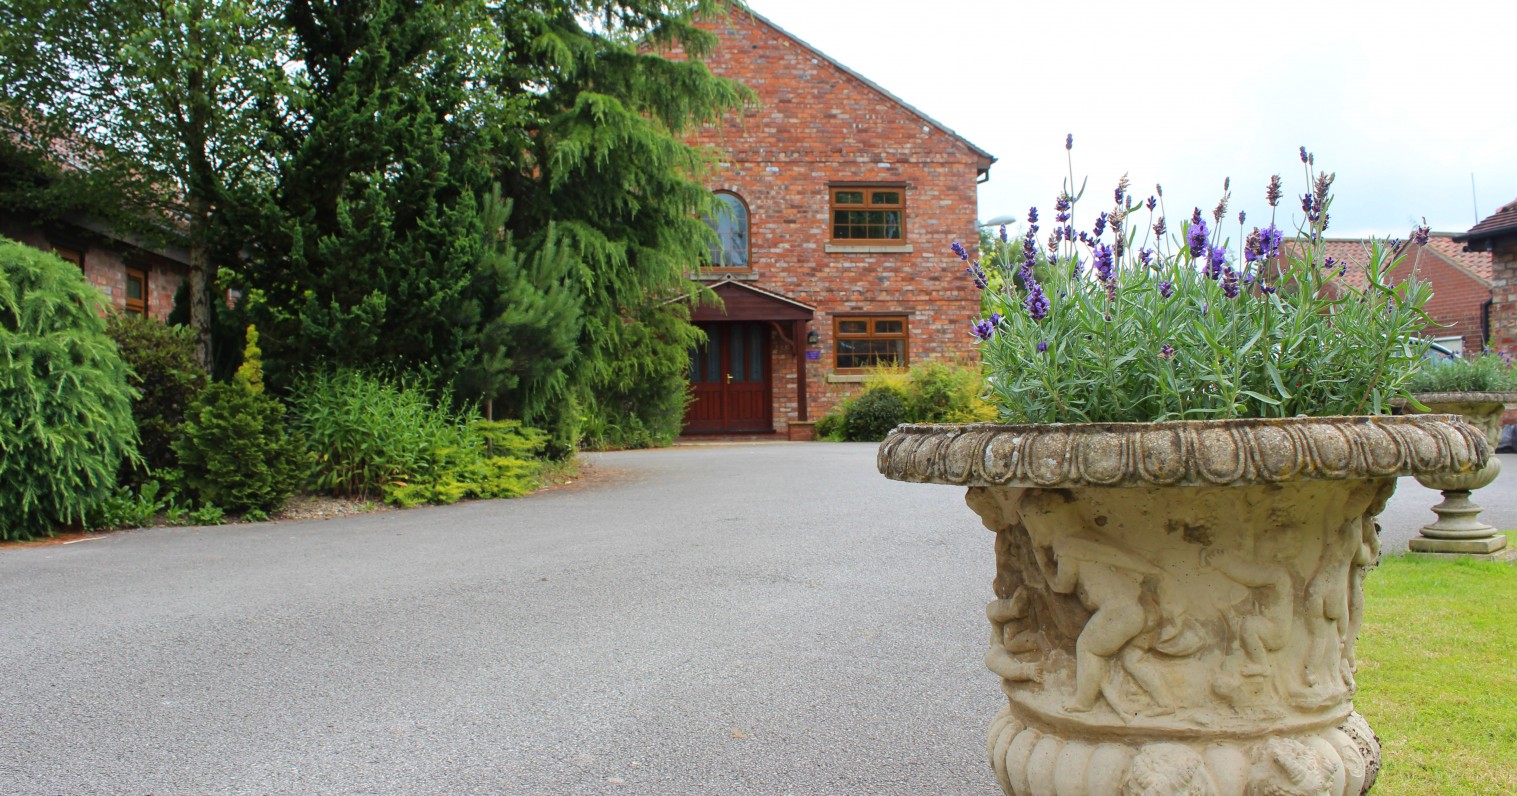 Villa Farm York Luxury Self Catered Holiday Cottages And Wedding